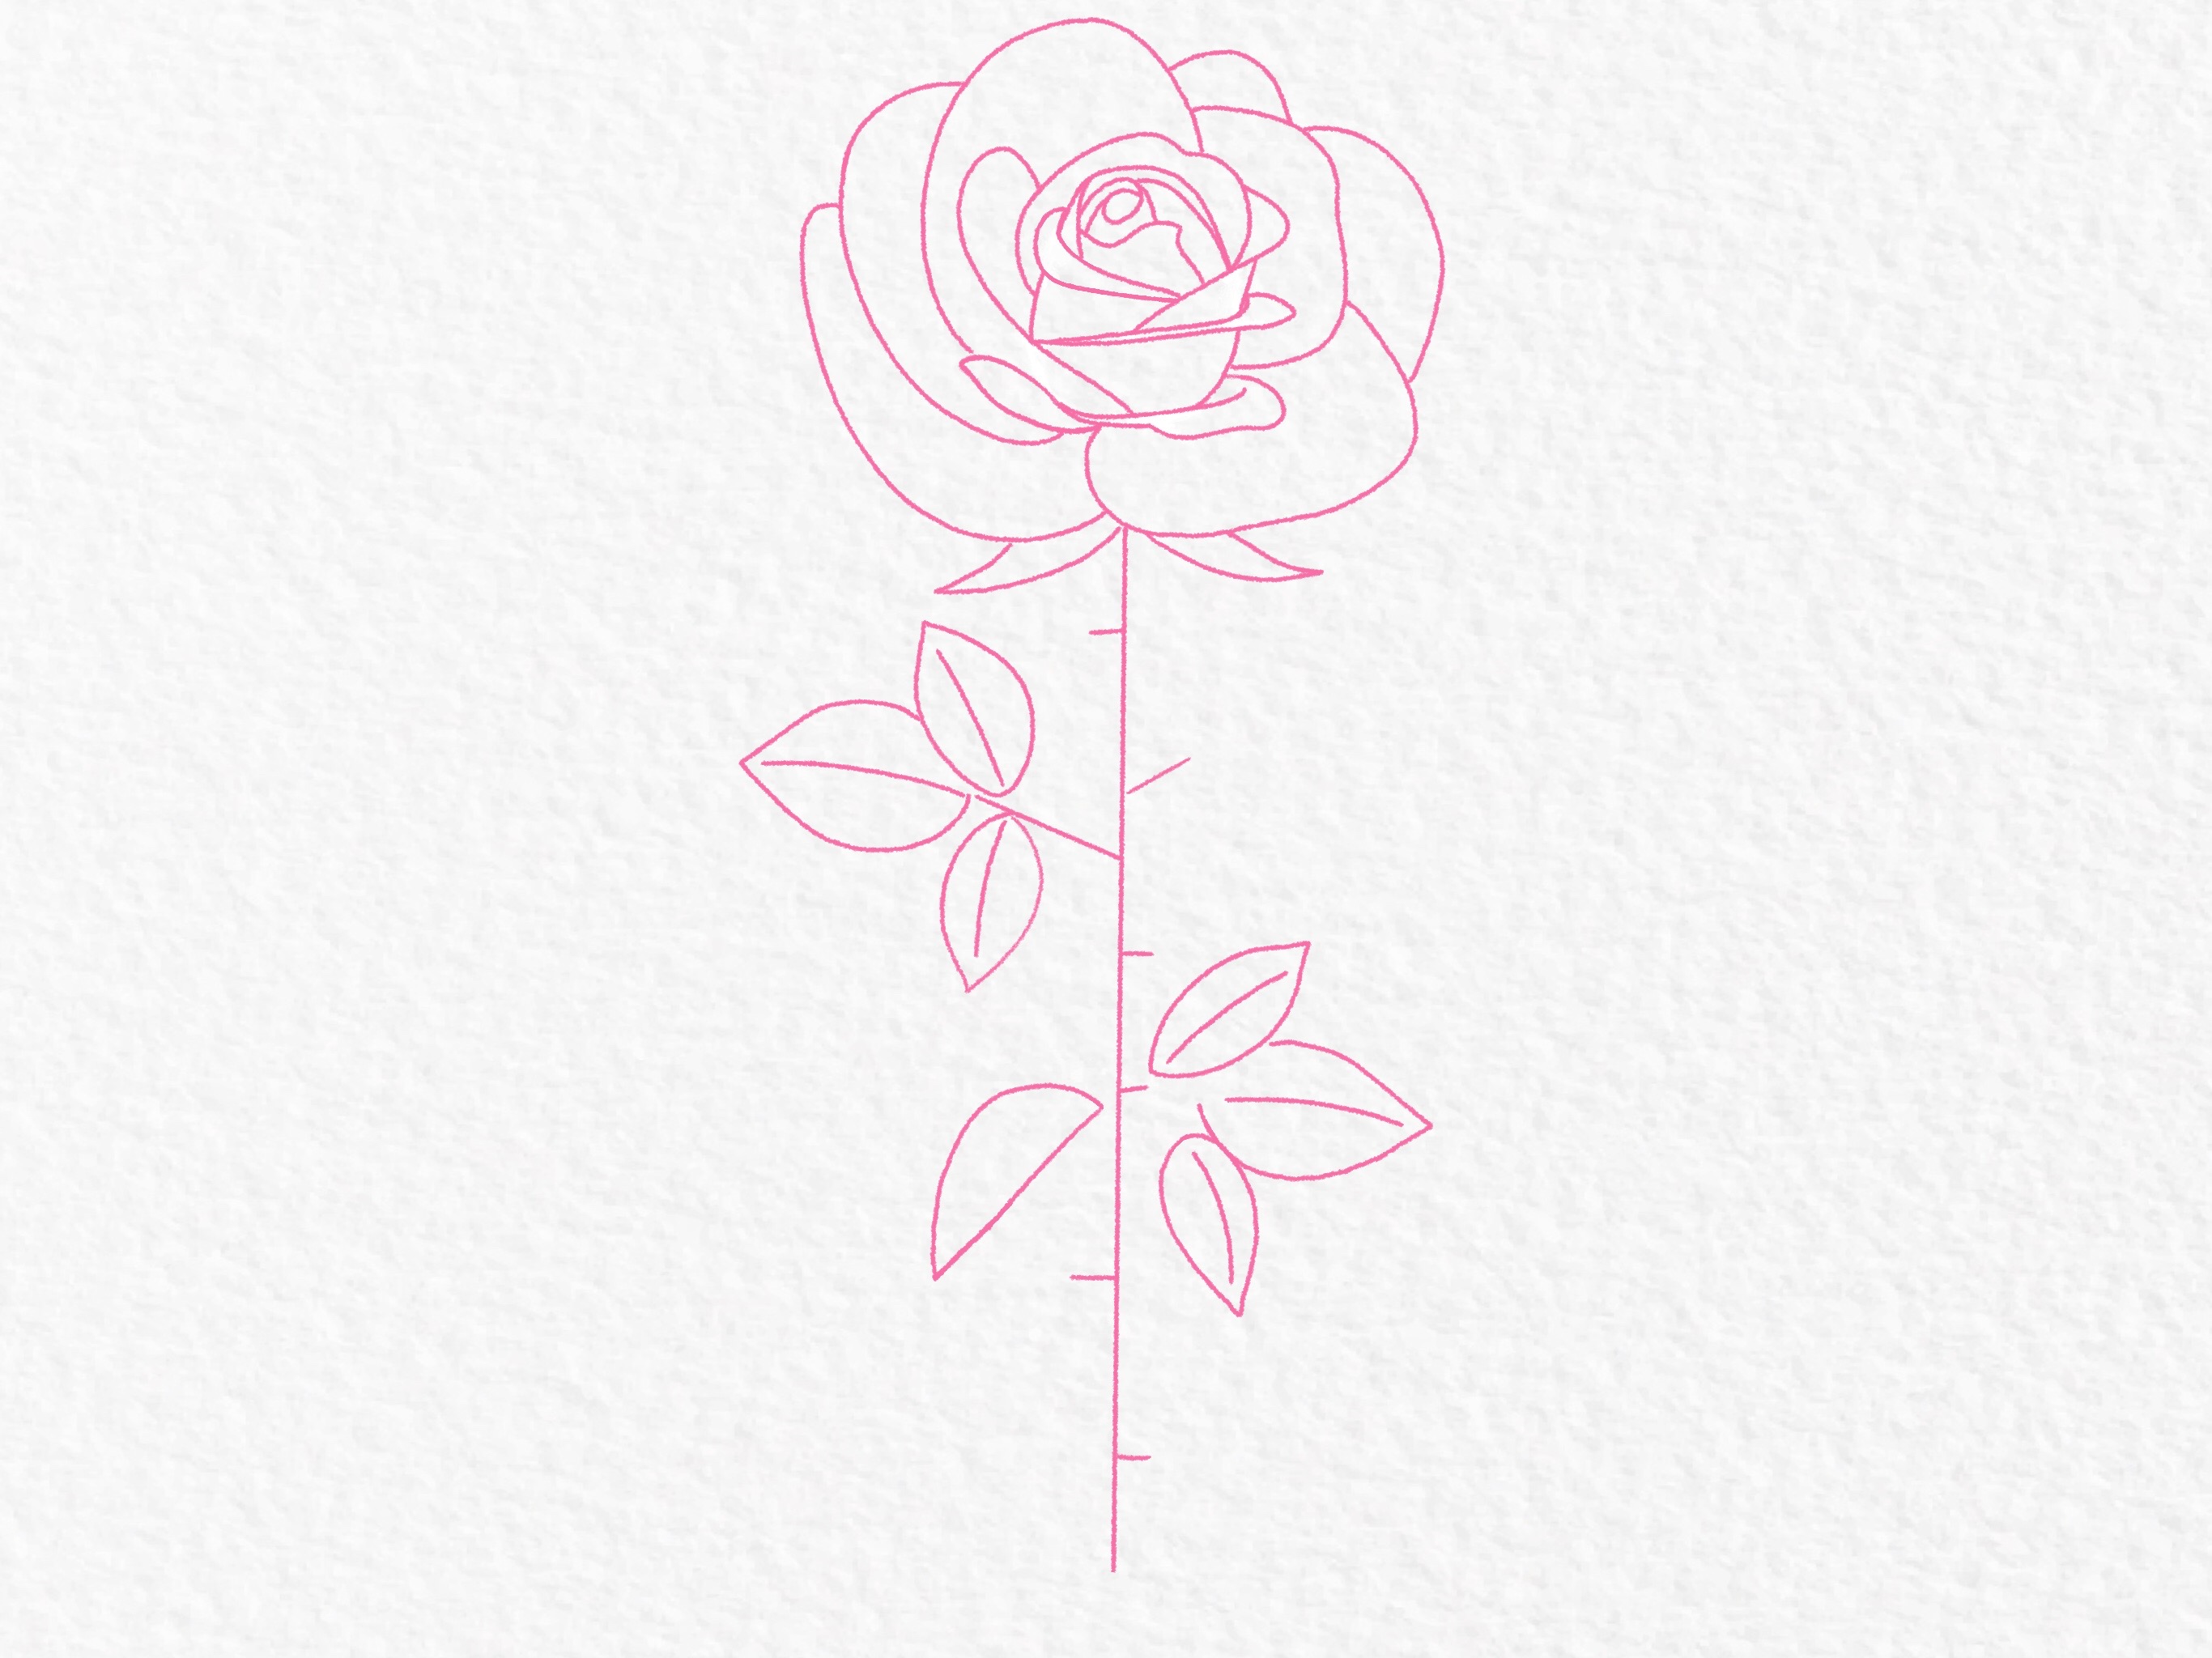 How to draw a rose, step by step drawing tutorial - step 26